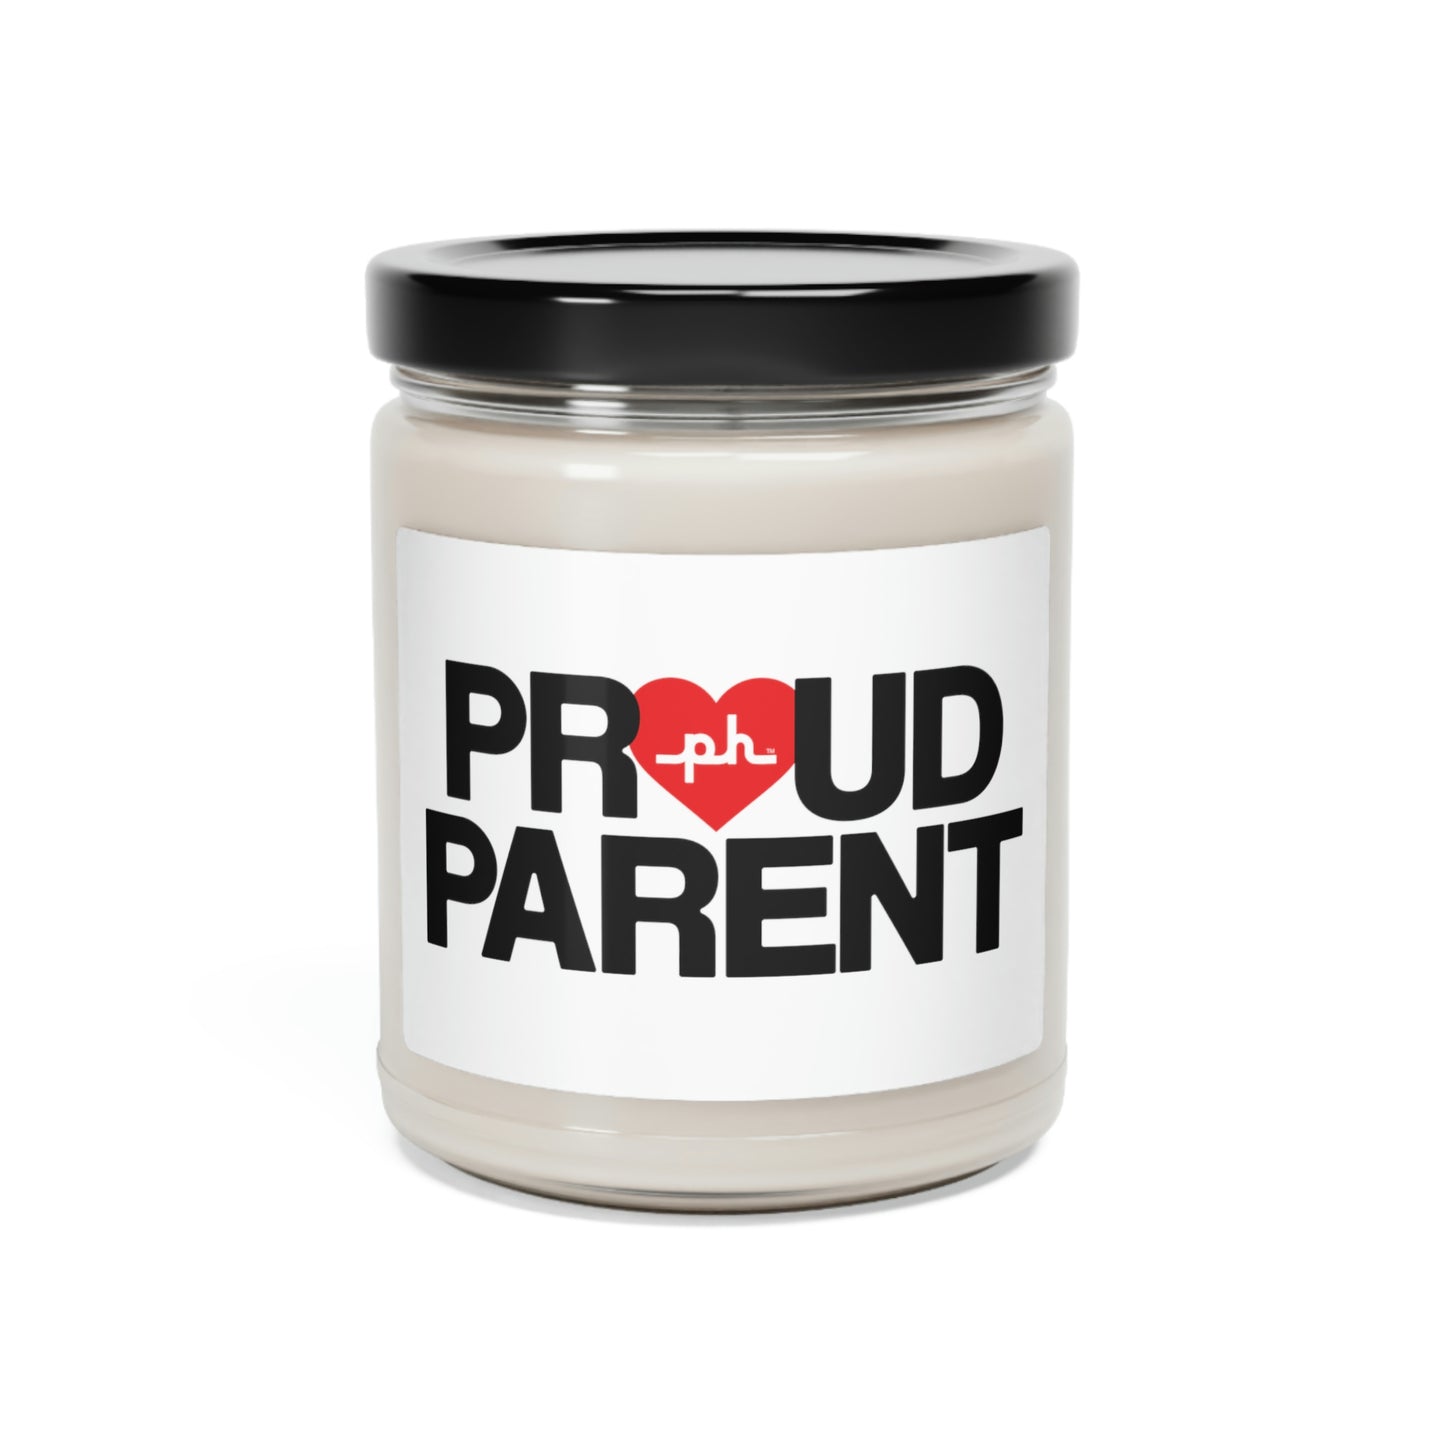 Proud Parent Scented Soy Candle, 9oz